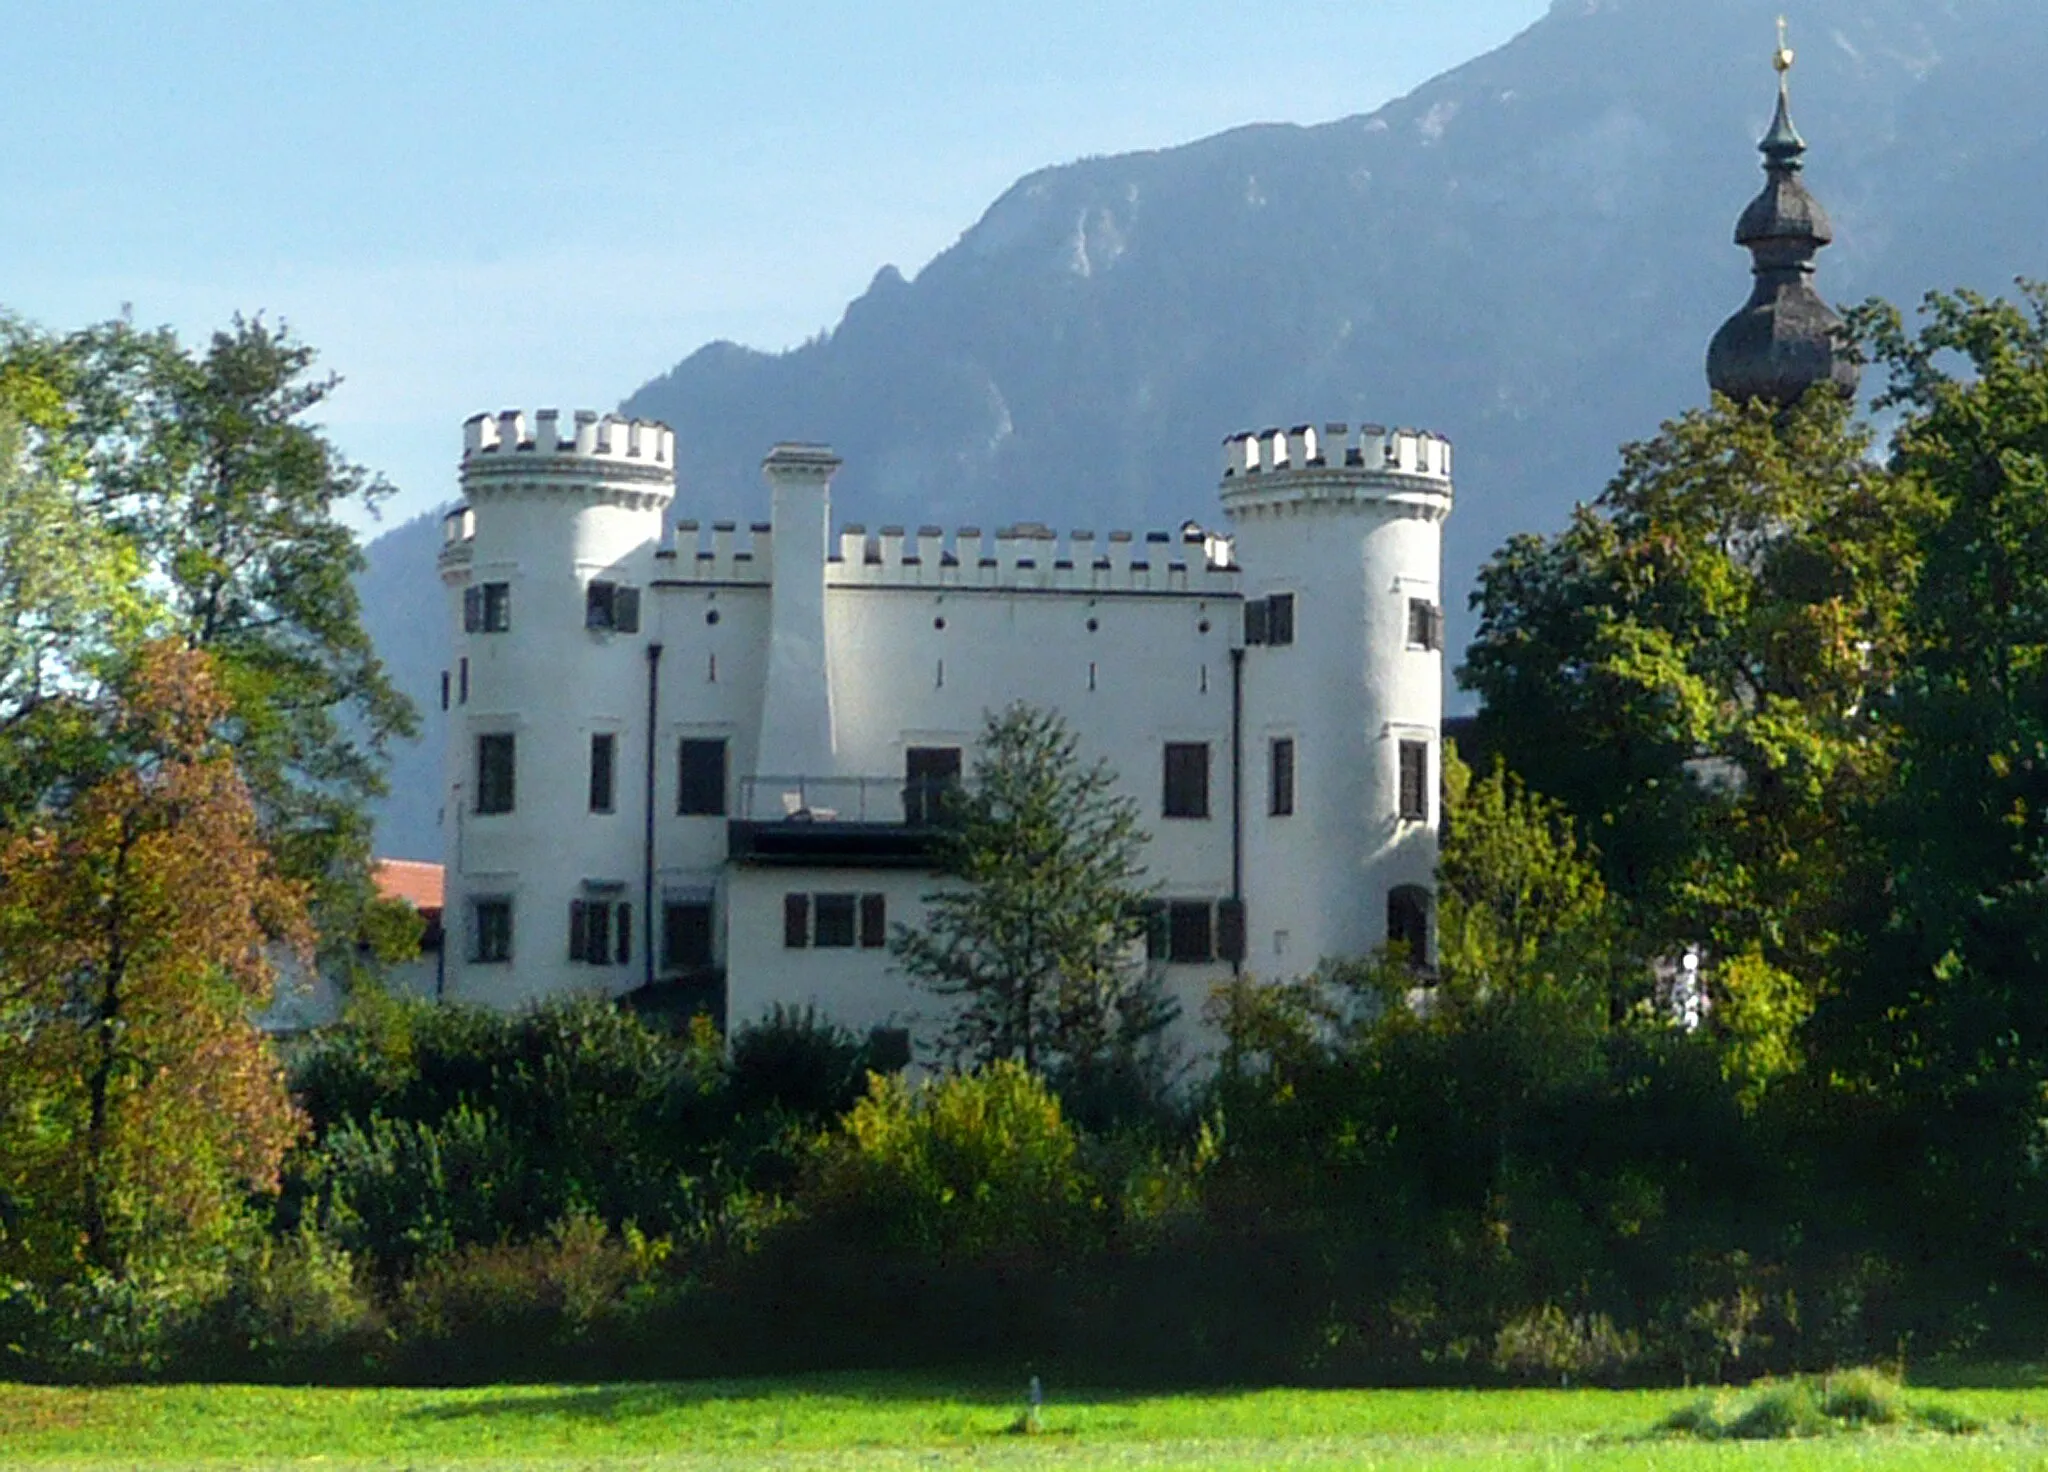 Photo showing: View to the Marzoll castle near Bad Reichenhall in Bavaria, Germany